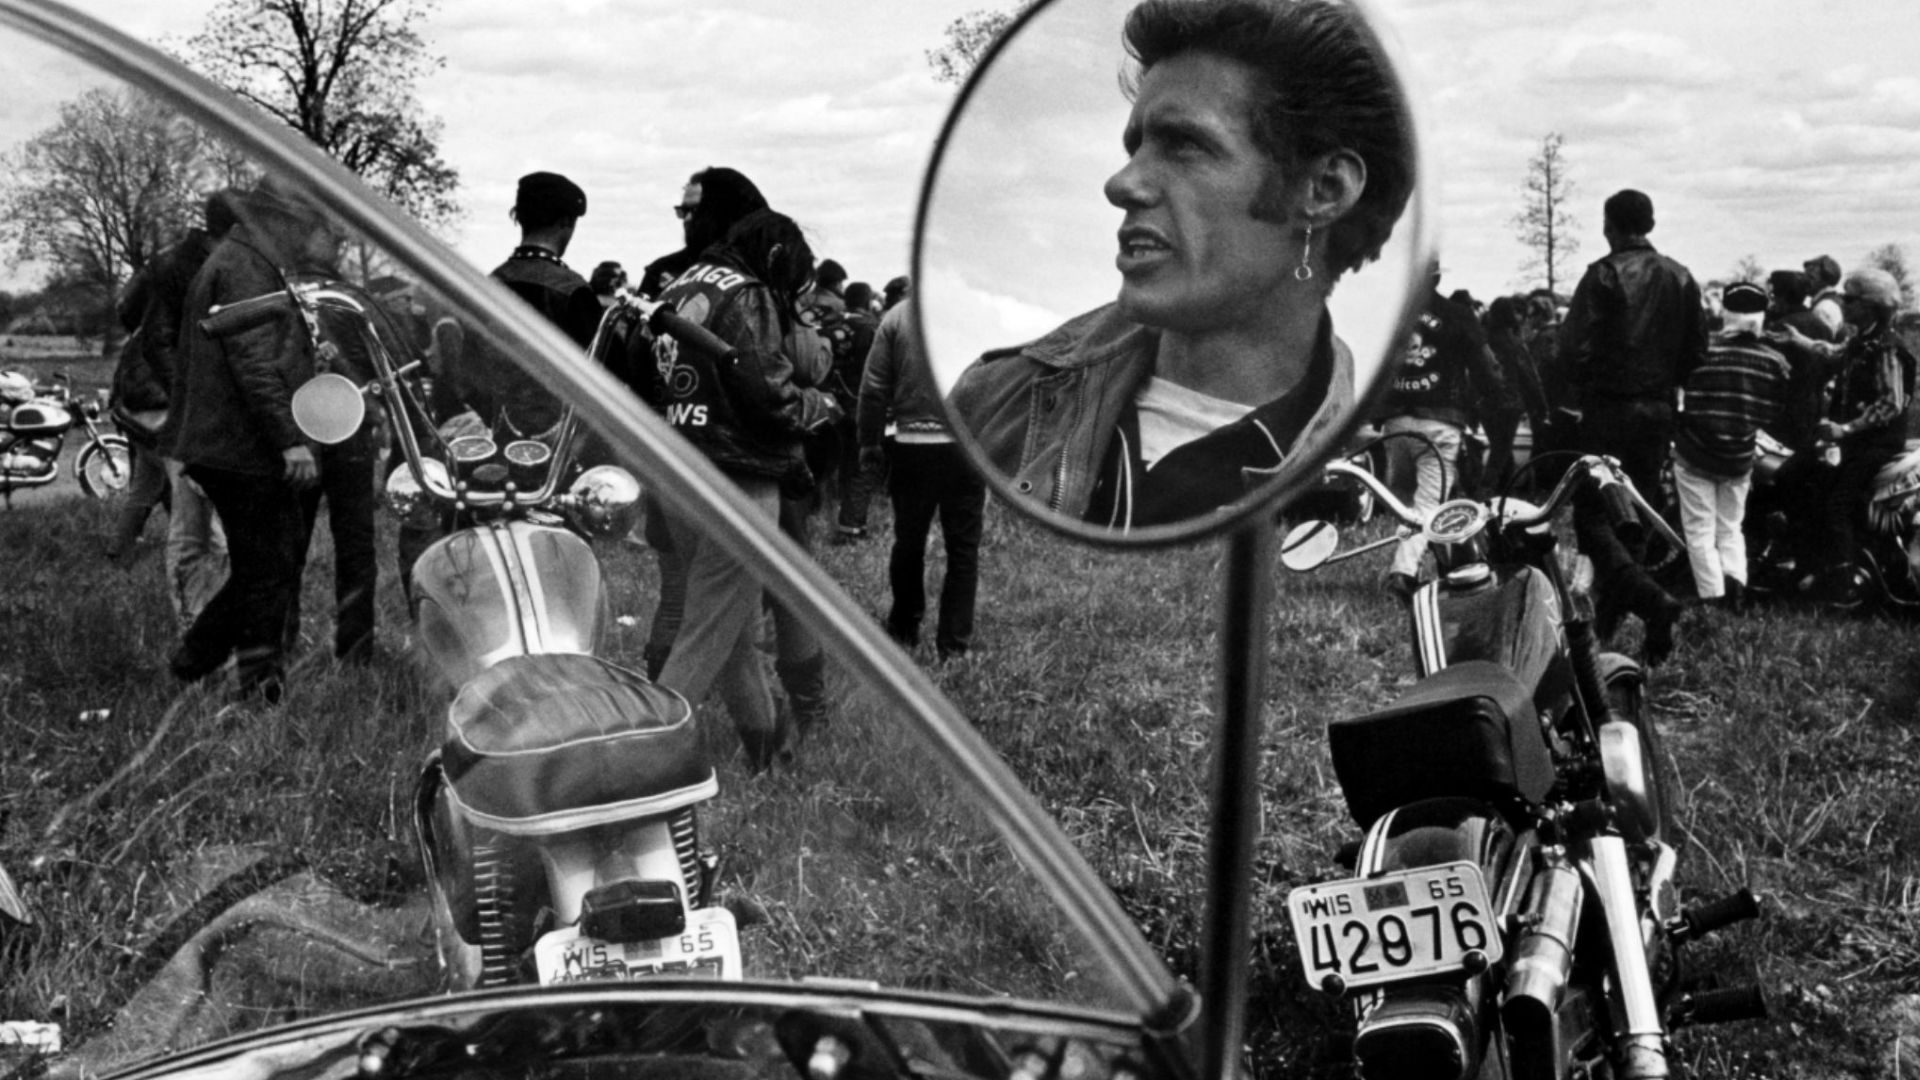 Photograph of Bikers by Danny Lyon